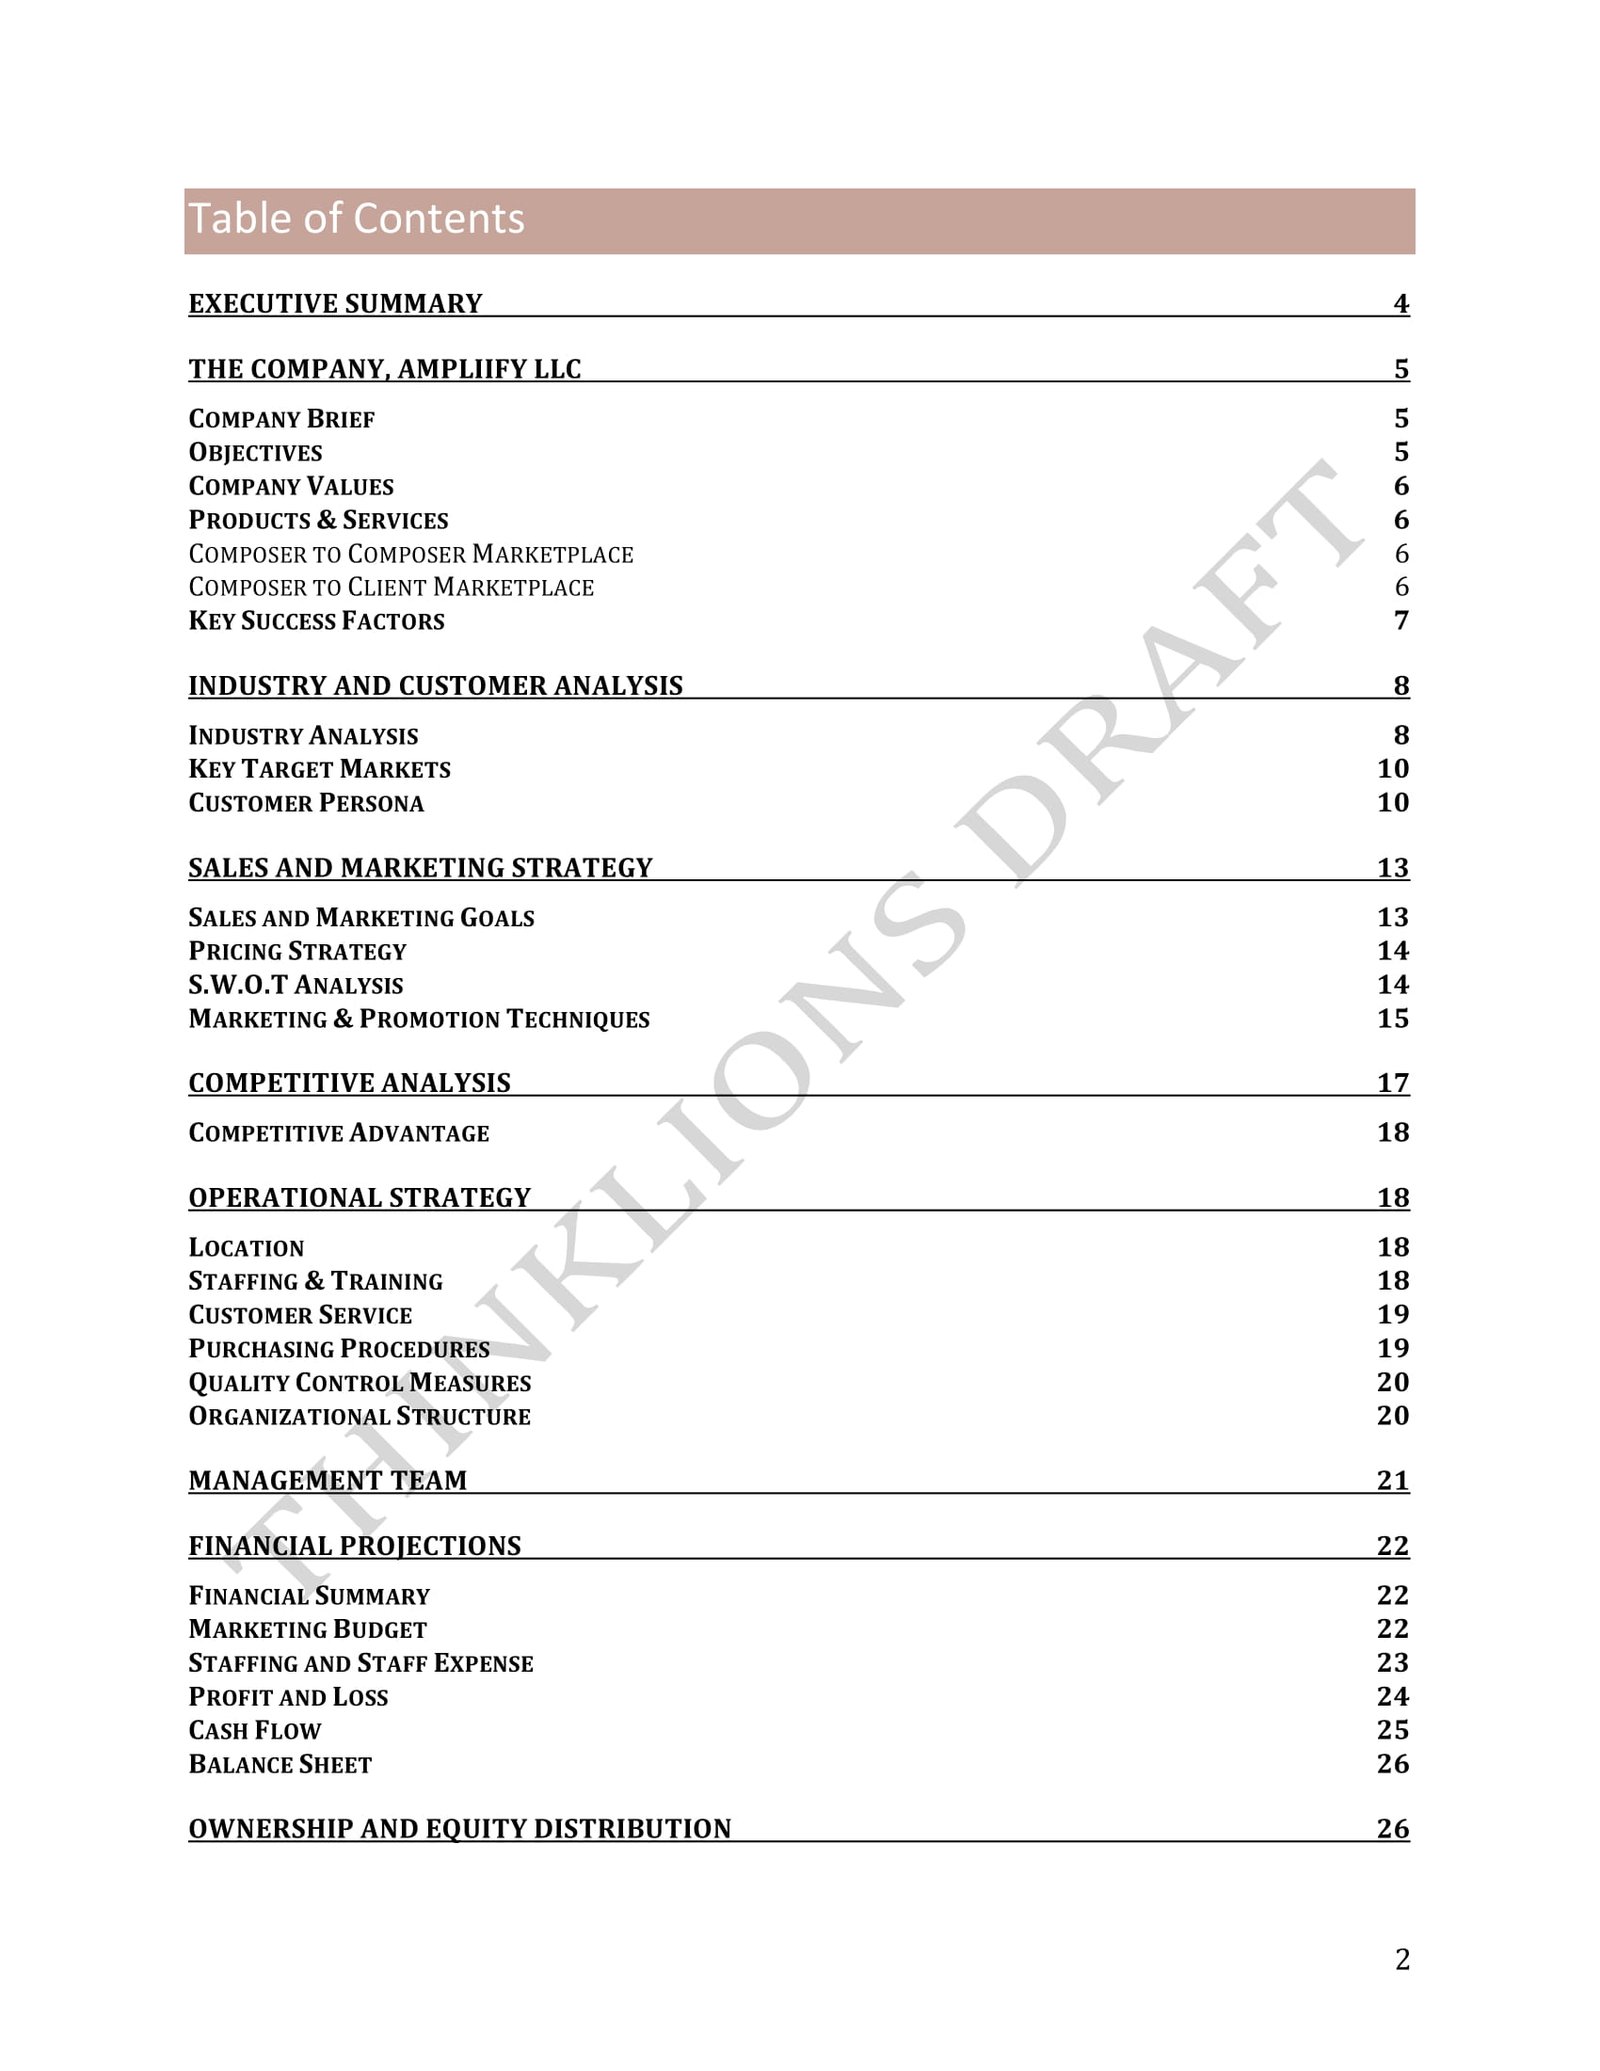 sample business plan - page 2